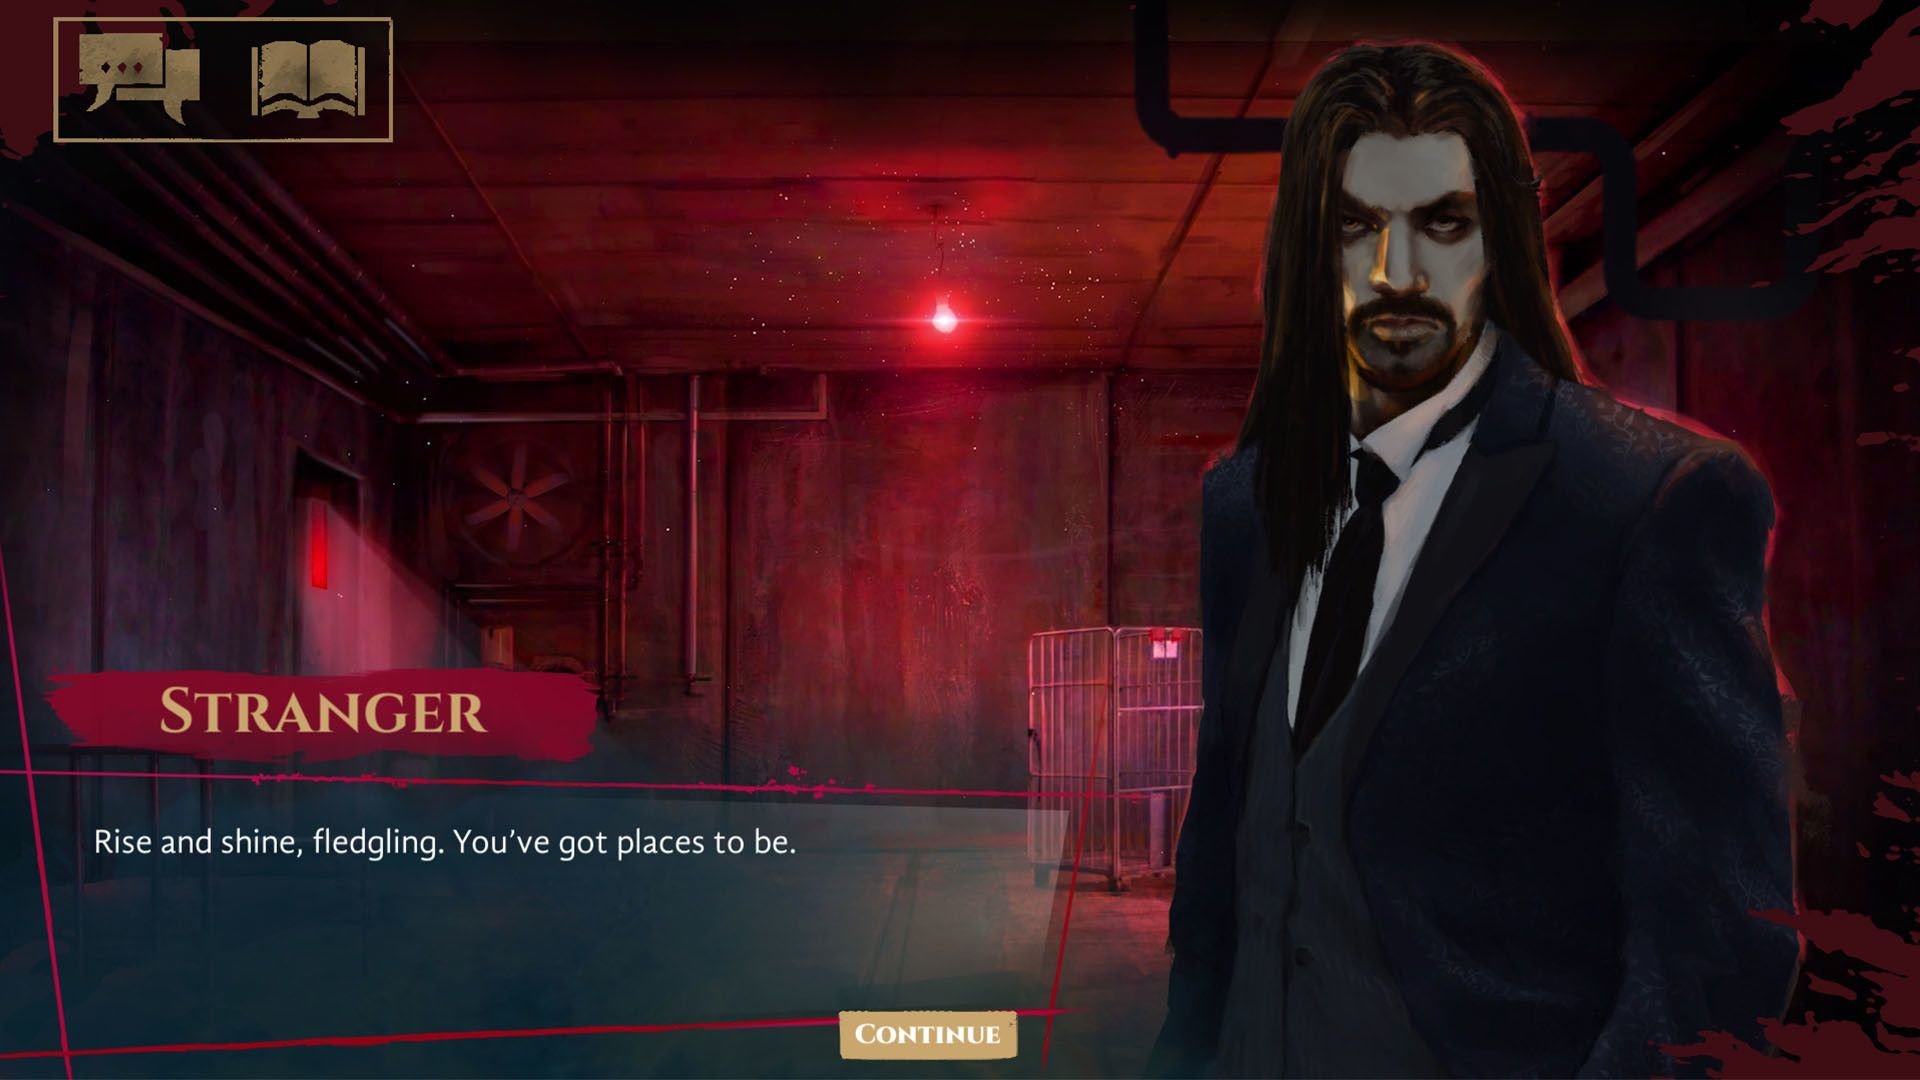 Vampire: The Masquerade - Coteries of New York Review - A Thin, Yet Tasty  NYC Slice